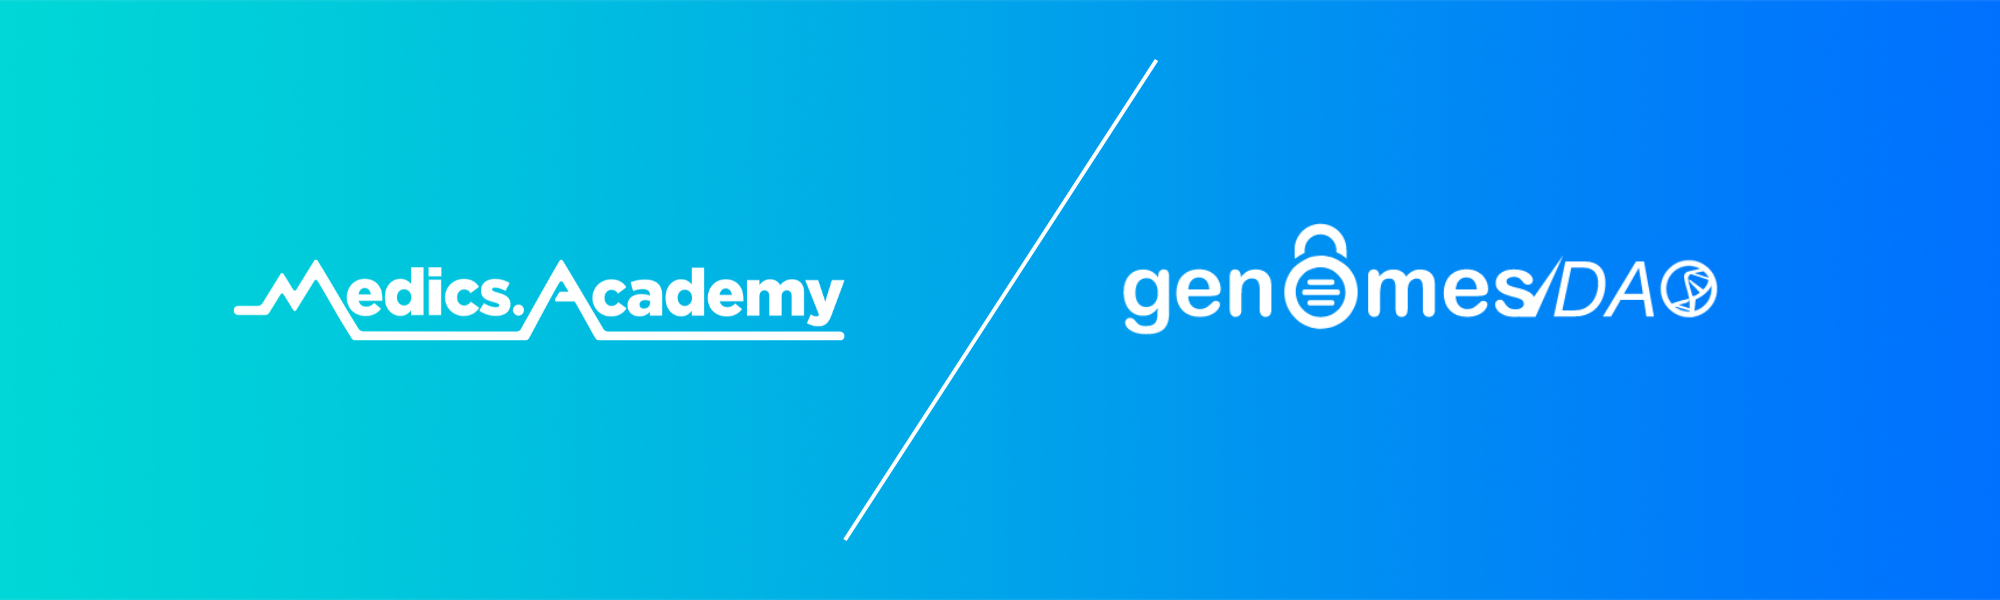 Medics.Academy Team Joins Forces with Genomes Partners